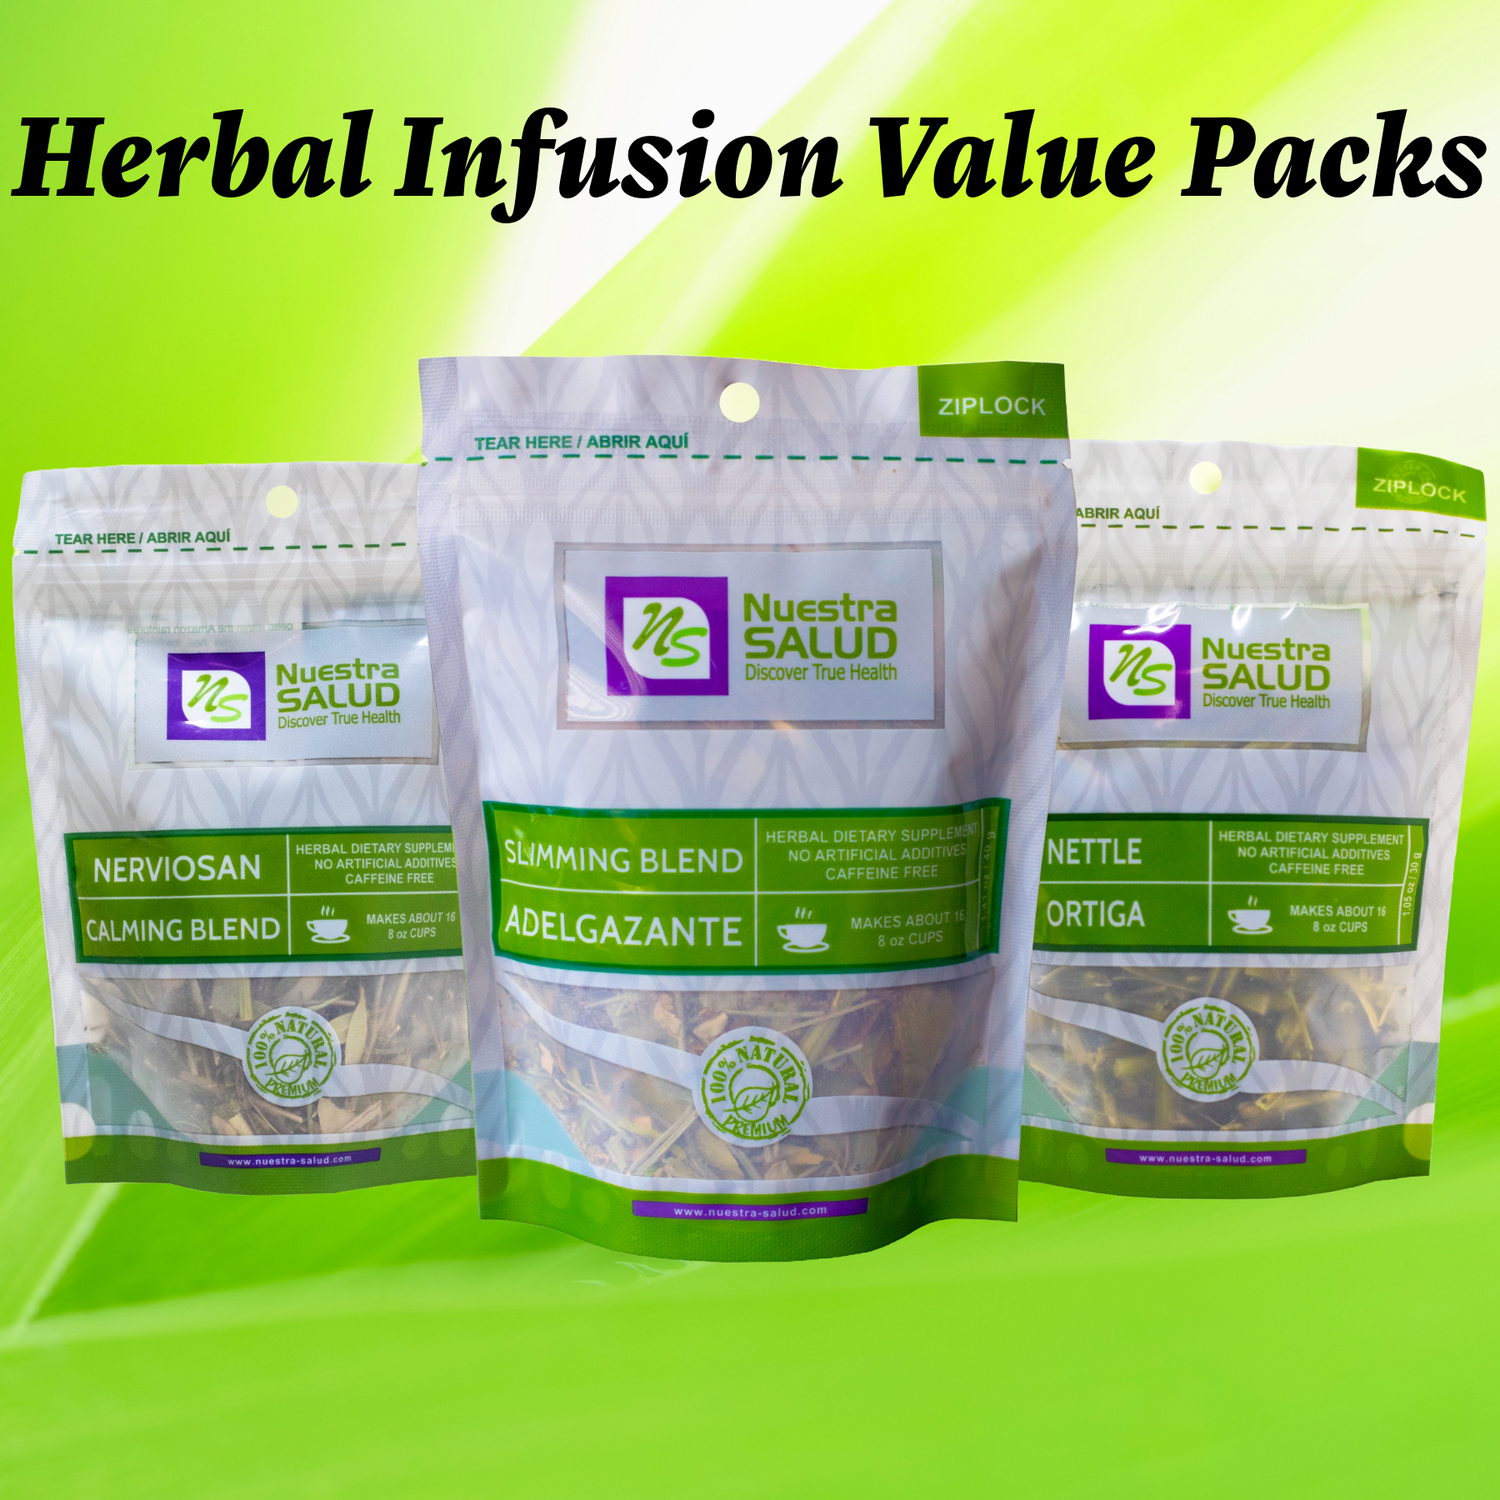 Herbal Infusion Teas & Blends